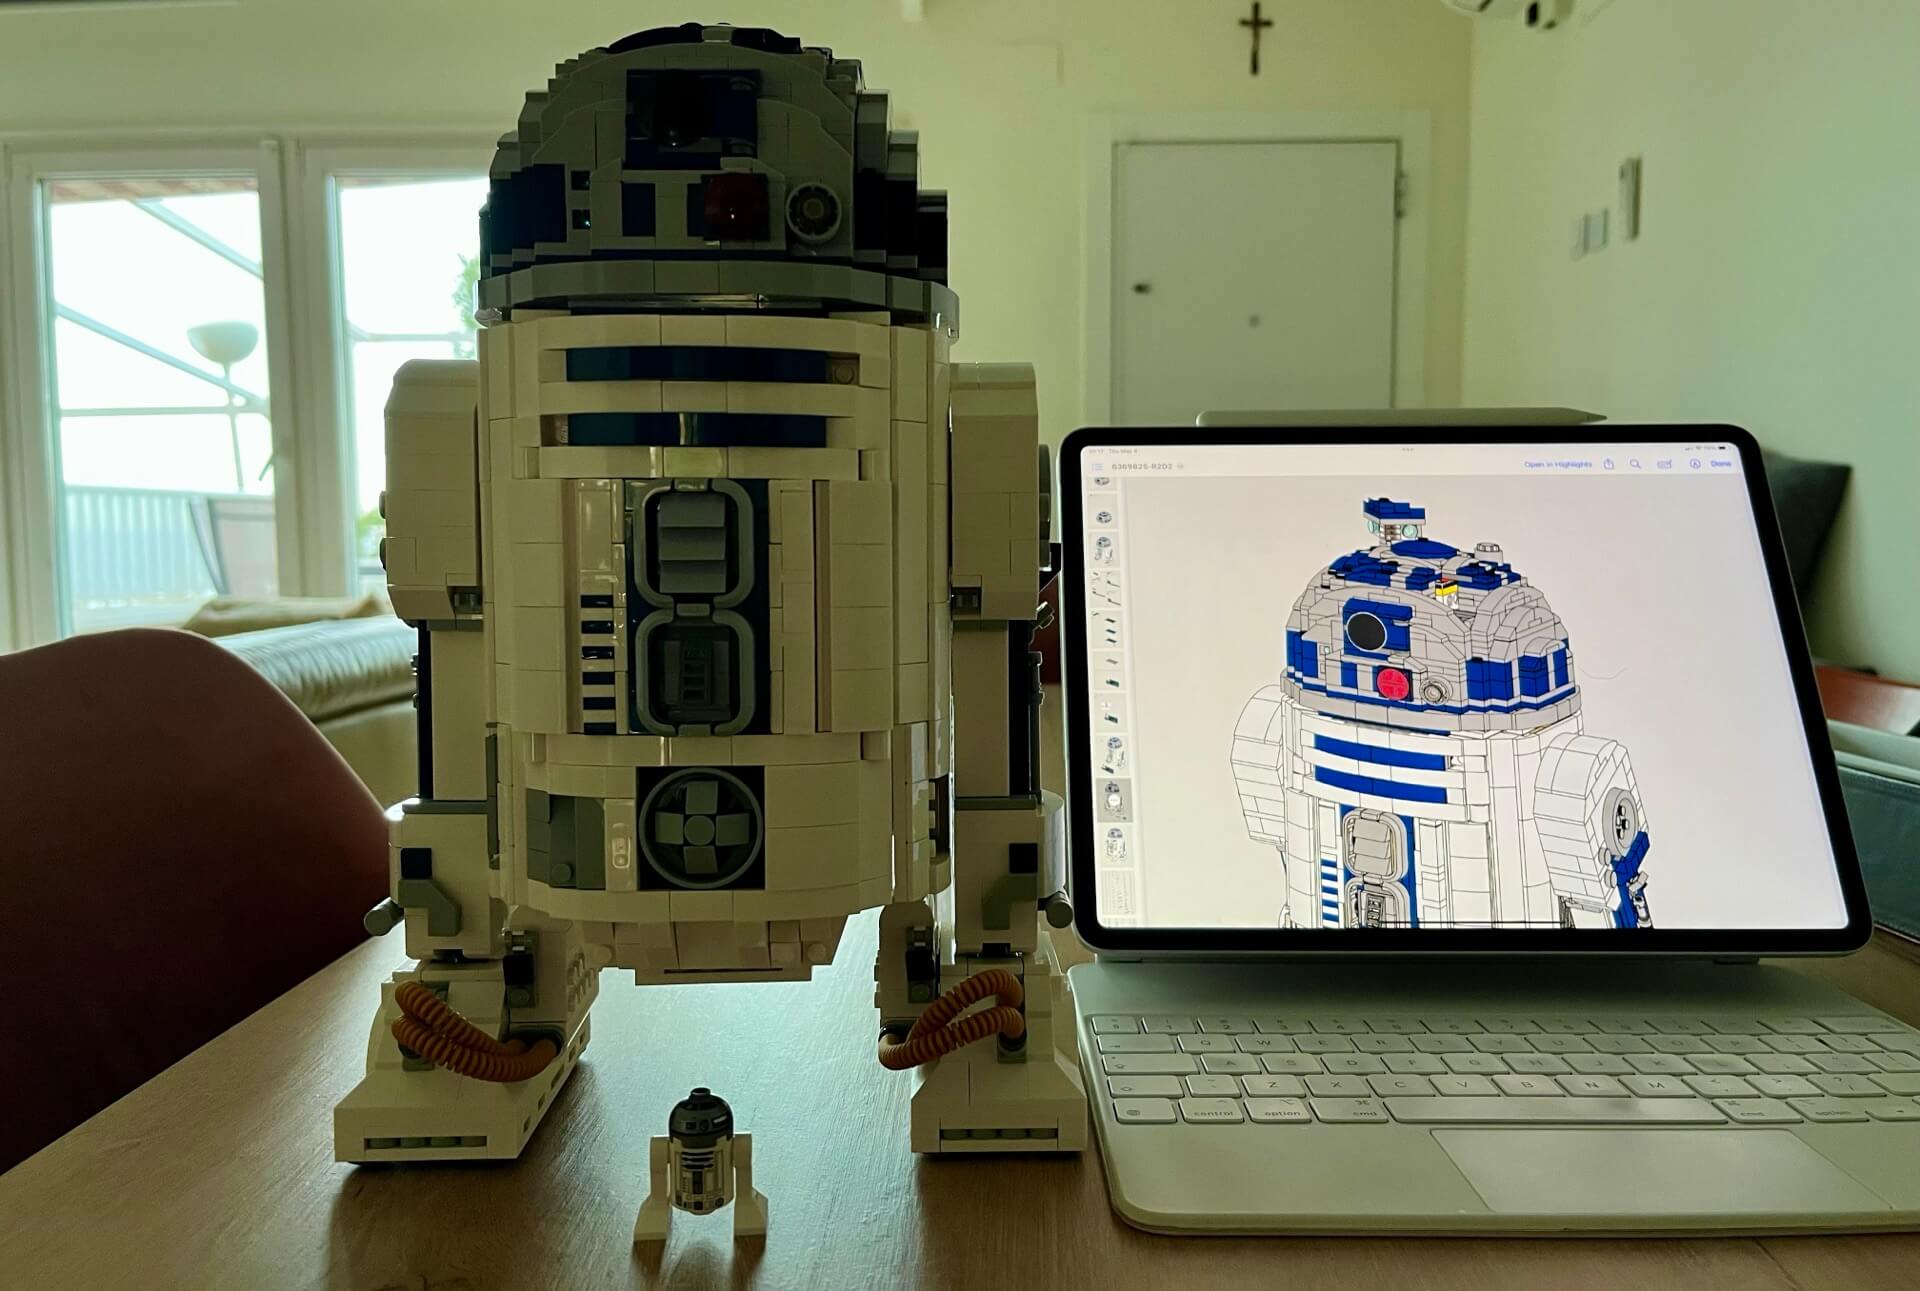 Building R2D2 Star Wars Lego robot which I got last Christmas done